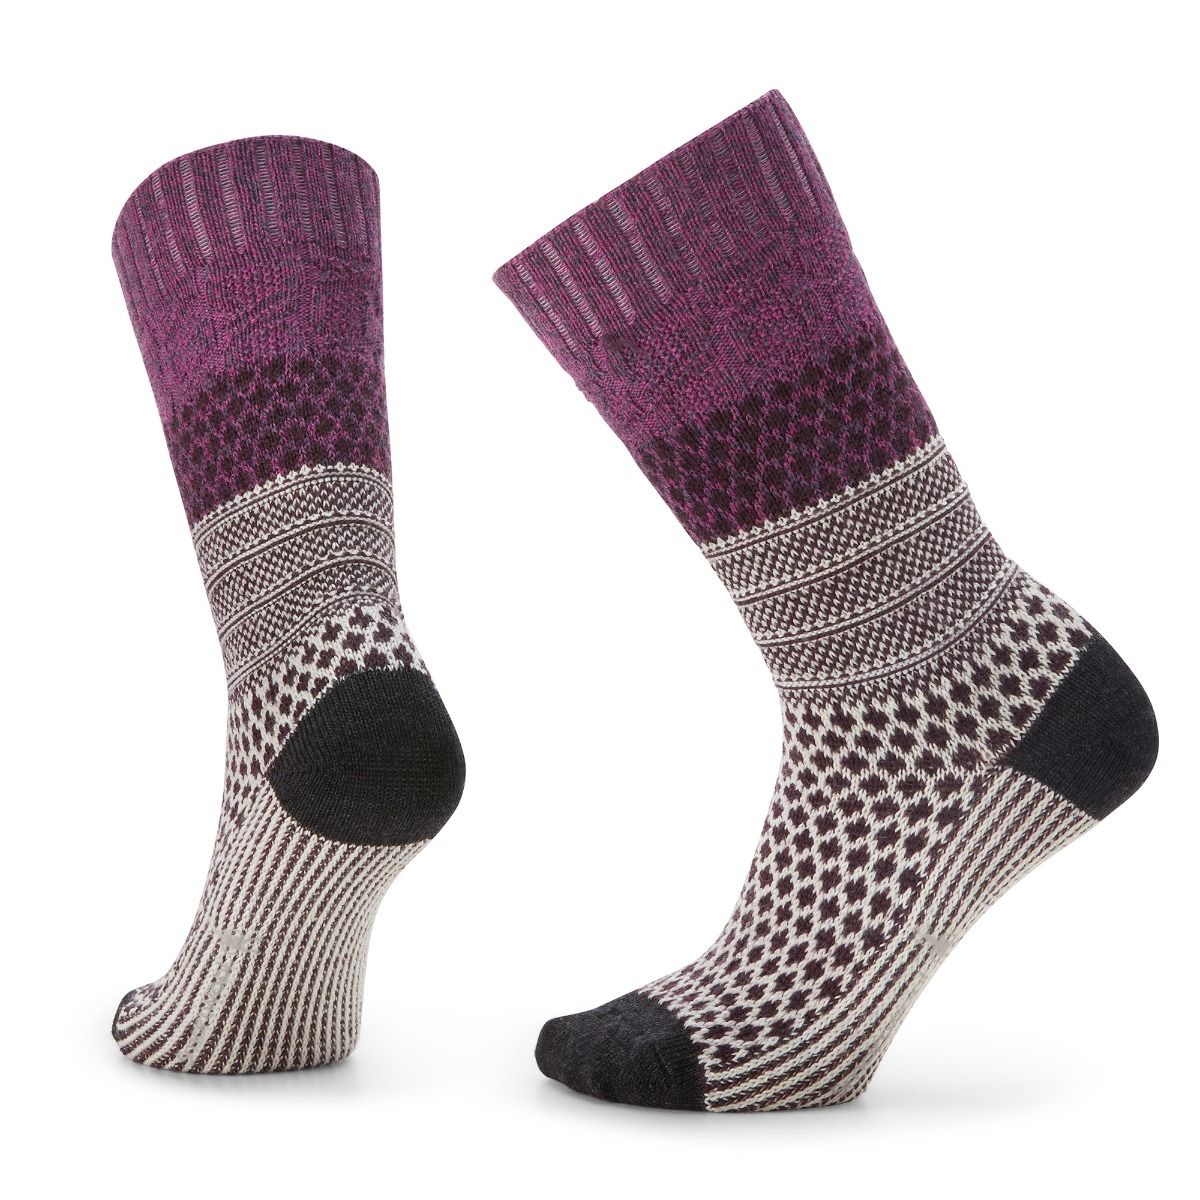 Everyday Popcorn Cable Crew Socks | Smartwool Canada